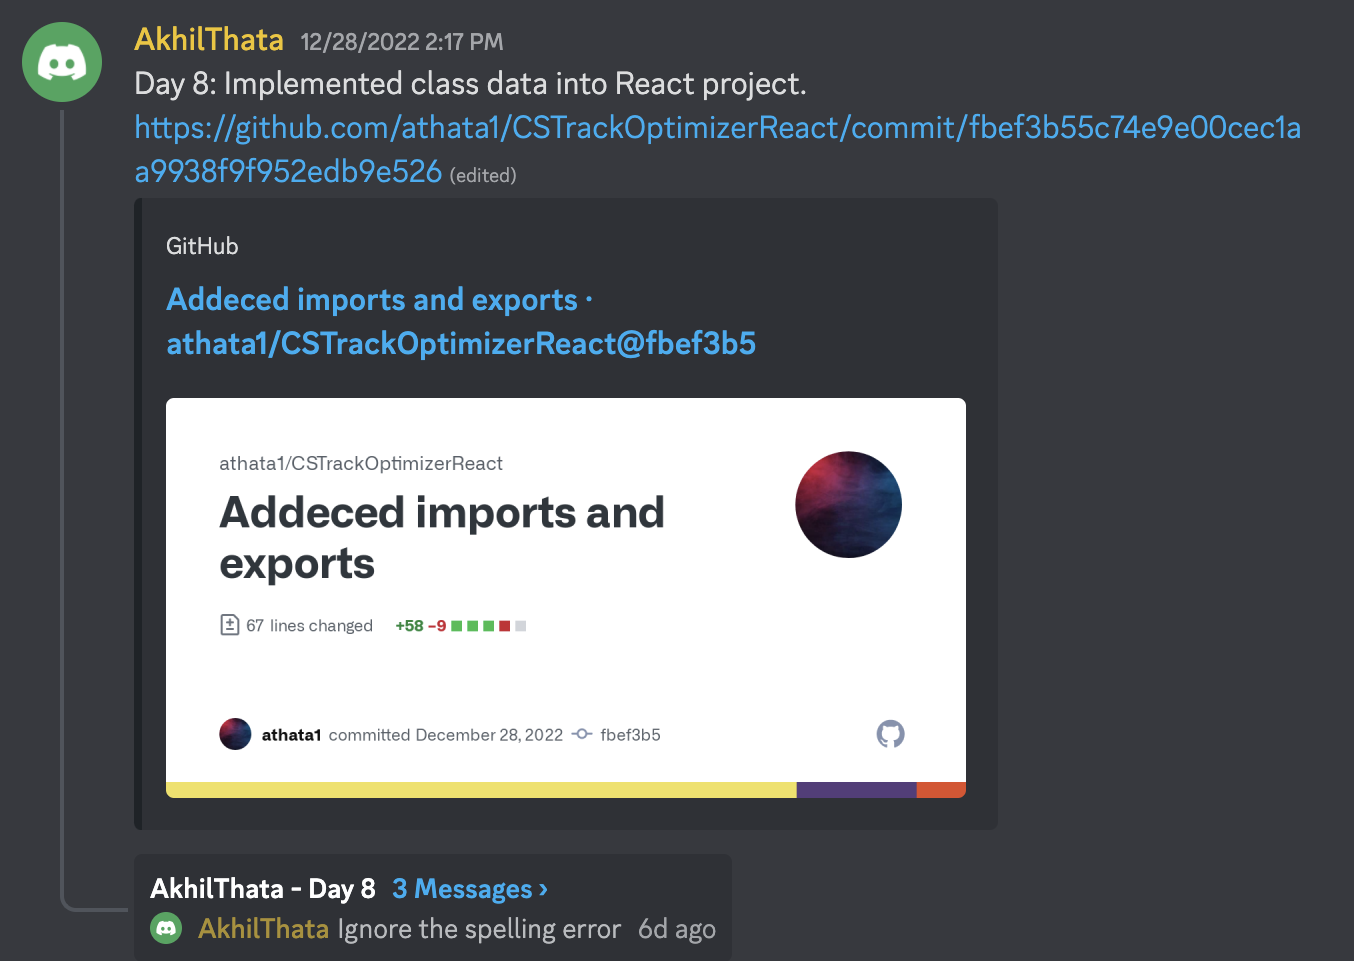 A message on Discord by user AkilTheta sharing an update about a React app called CS Track Optimizer